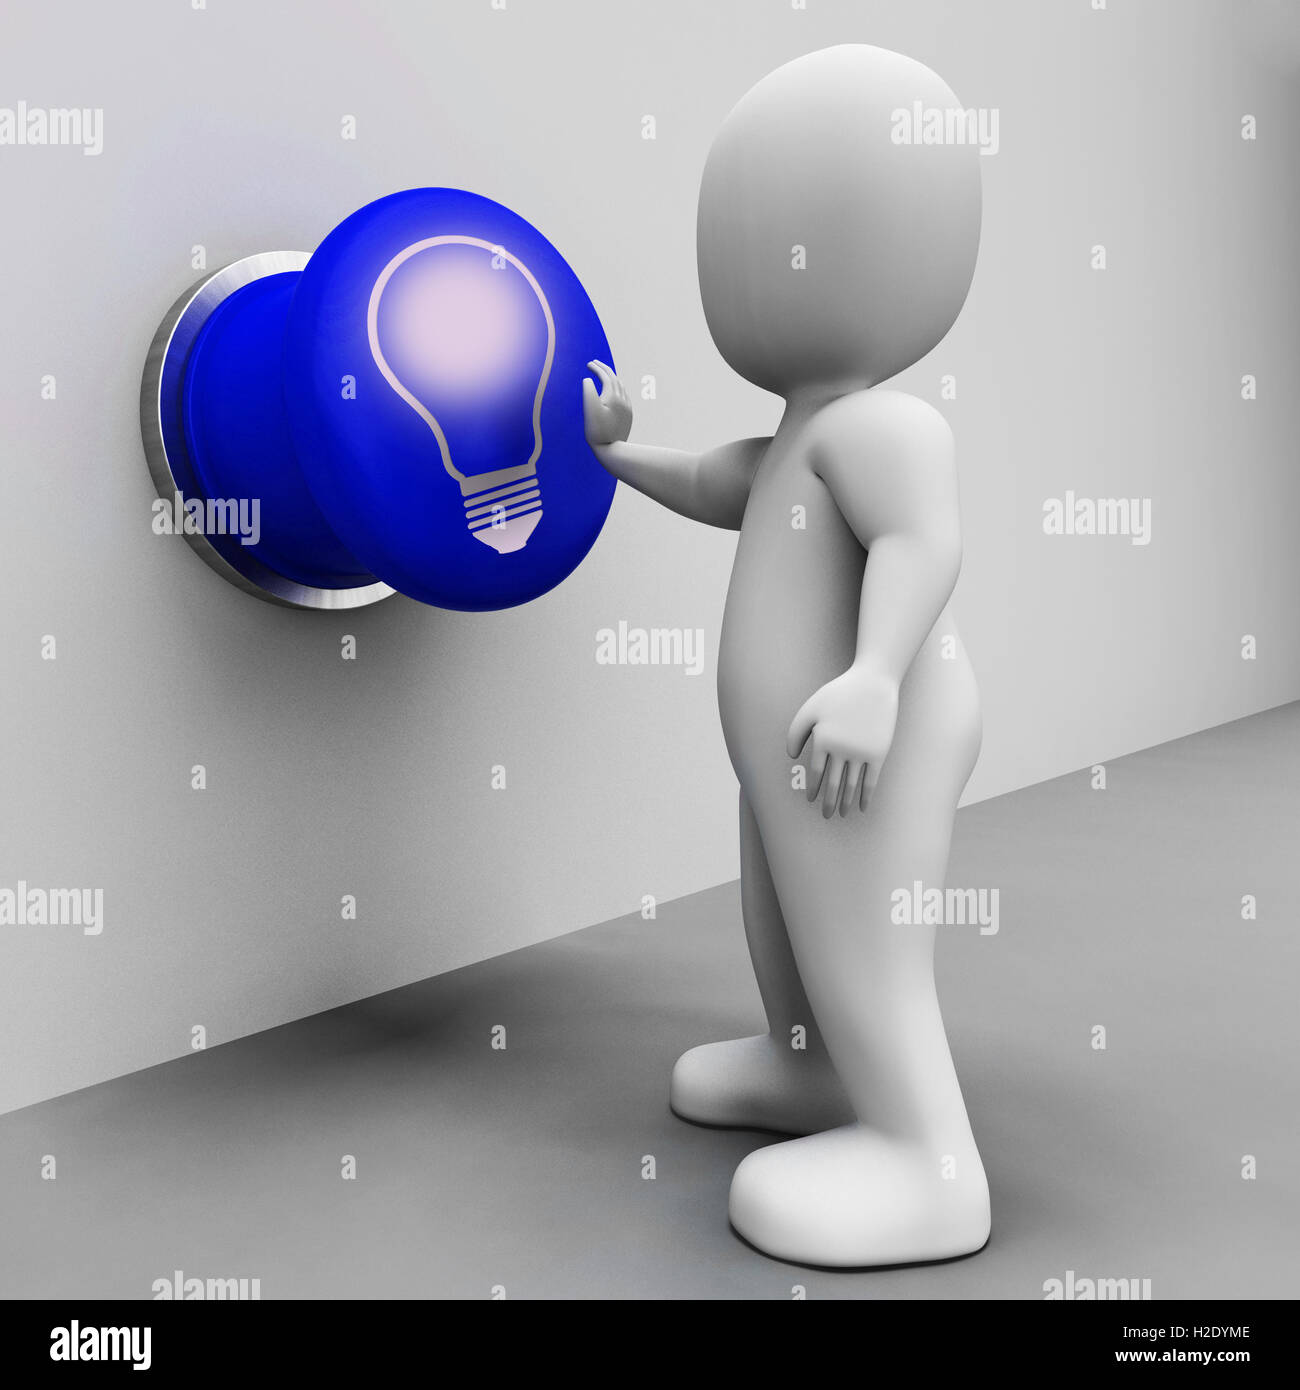 Light Bulb Button Shows Lit Up Or Bright Idea Stock Photo